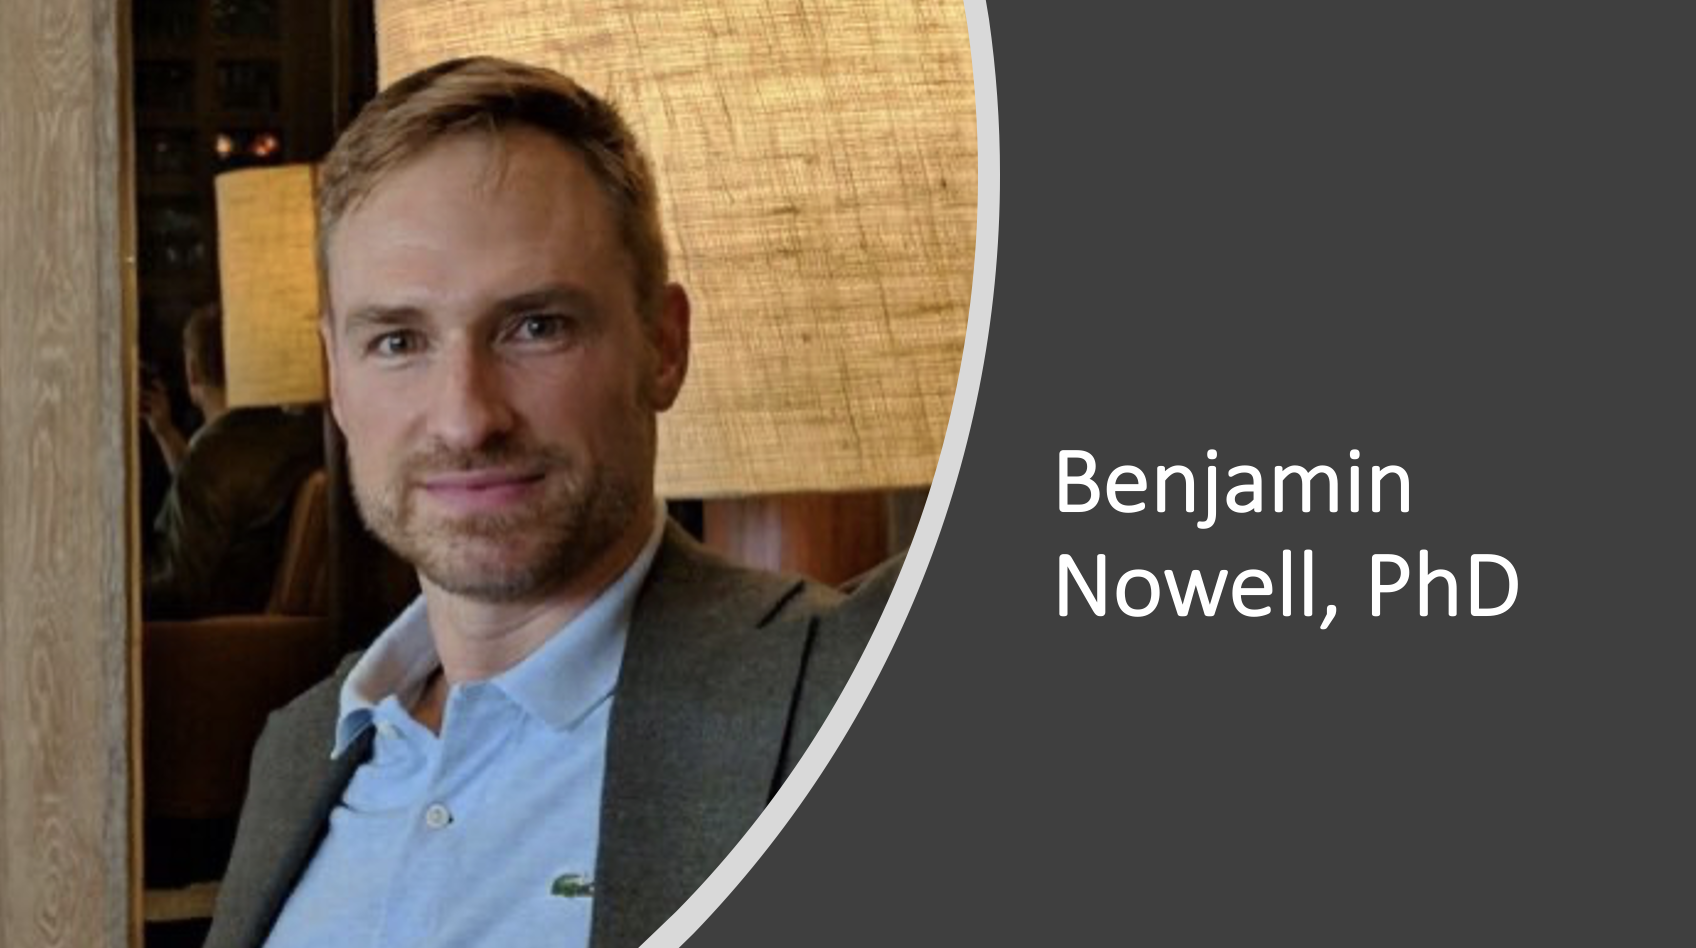 Benjamin Nowell, PhD: Mindfulness Program for Patients With Rheumatic Disease